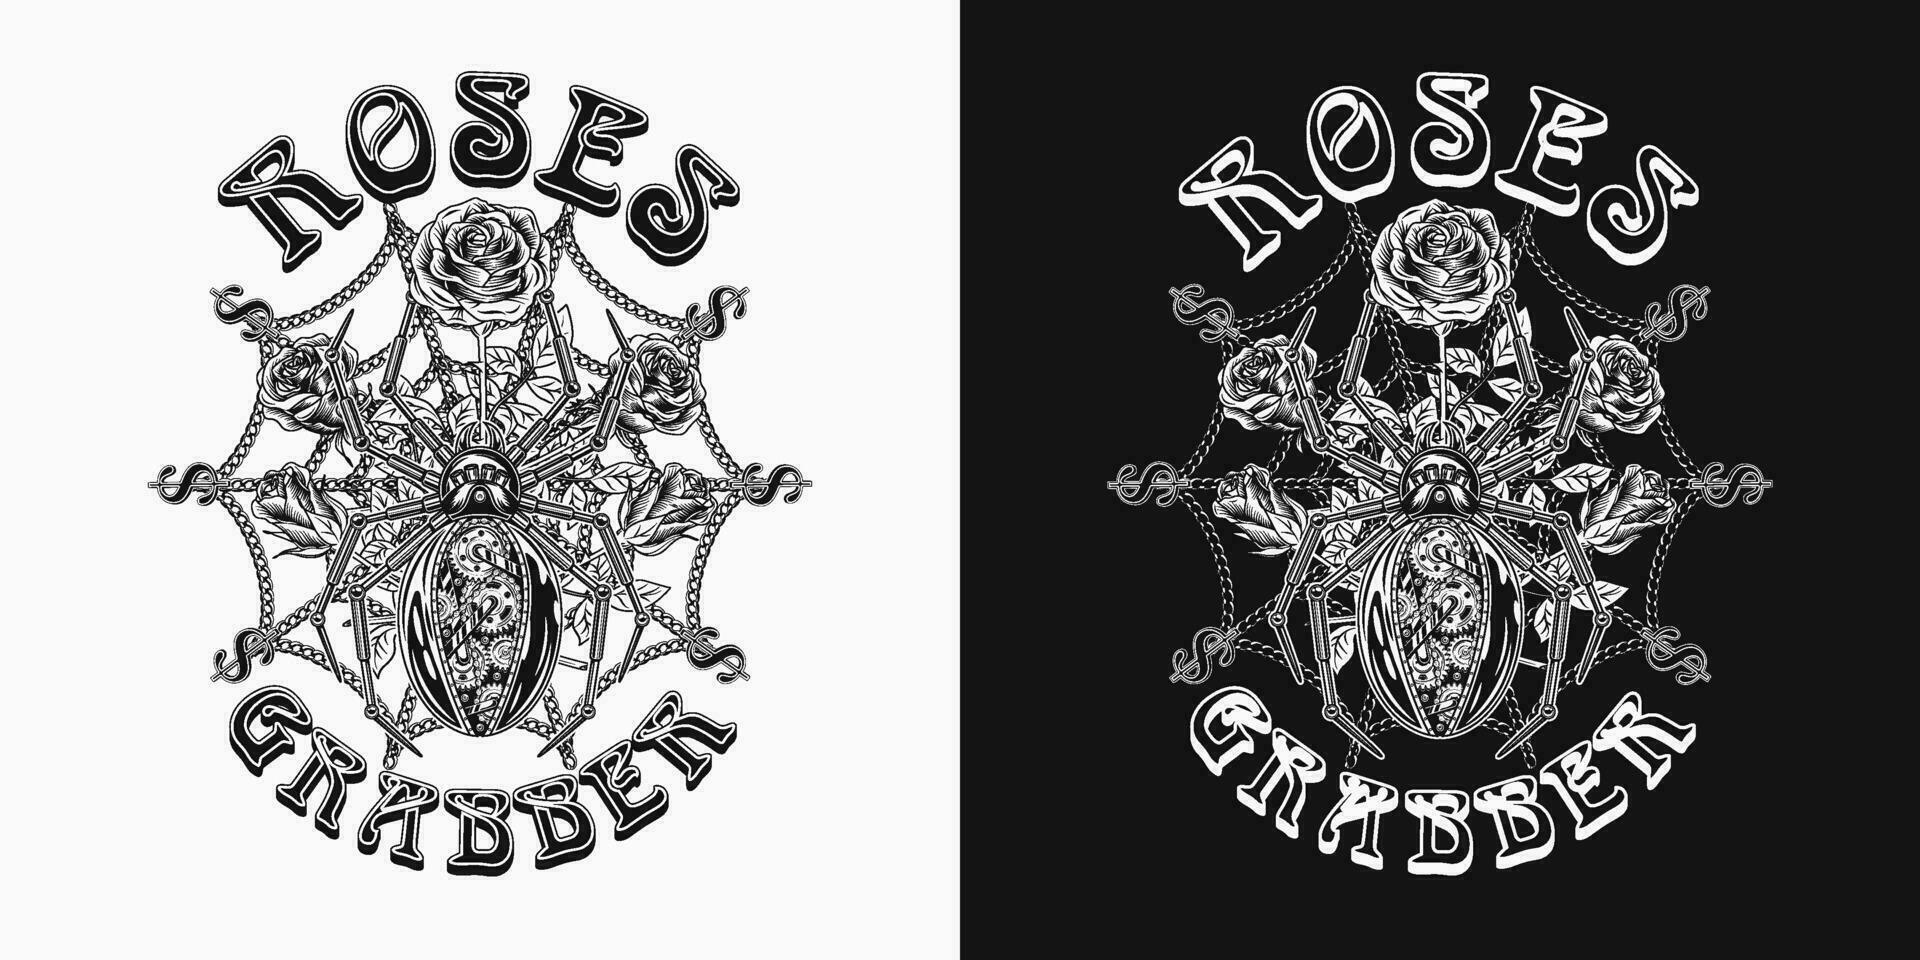 Surreal fantasy label with metallic robot spider in steampunk style, roses, dollar sign, text, spiderweb behind. Monochrome illustration for prints, clothing, tattoo, surface design. vector